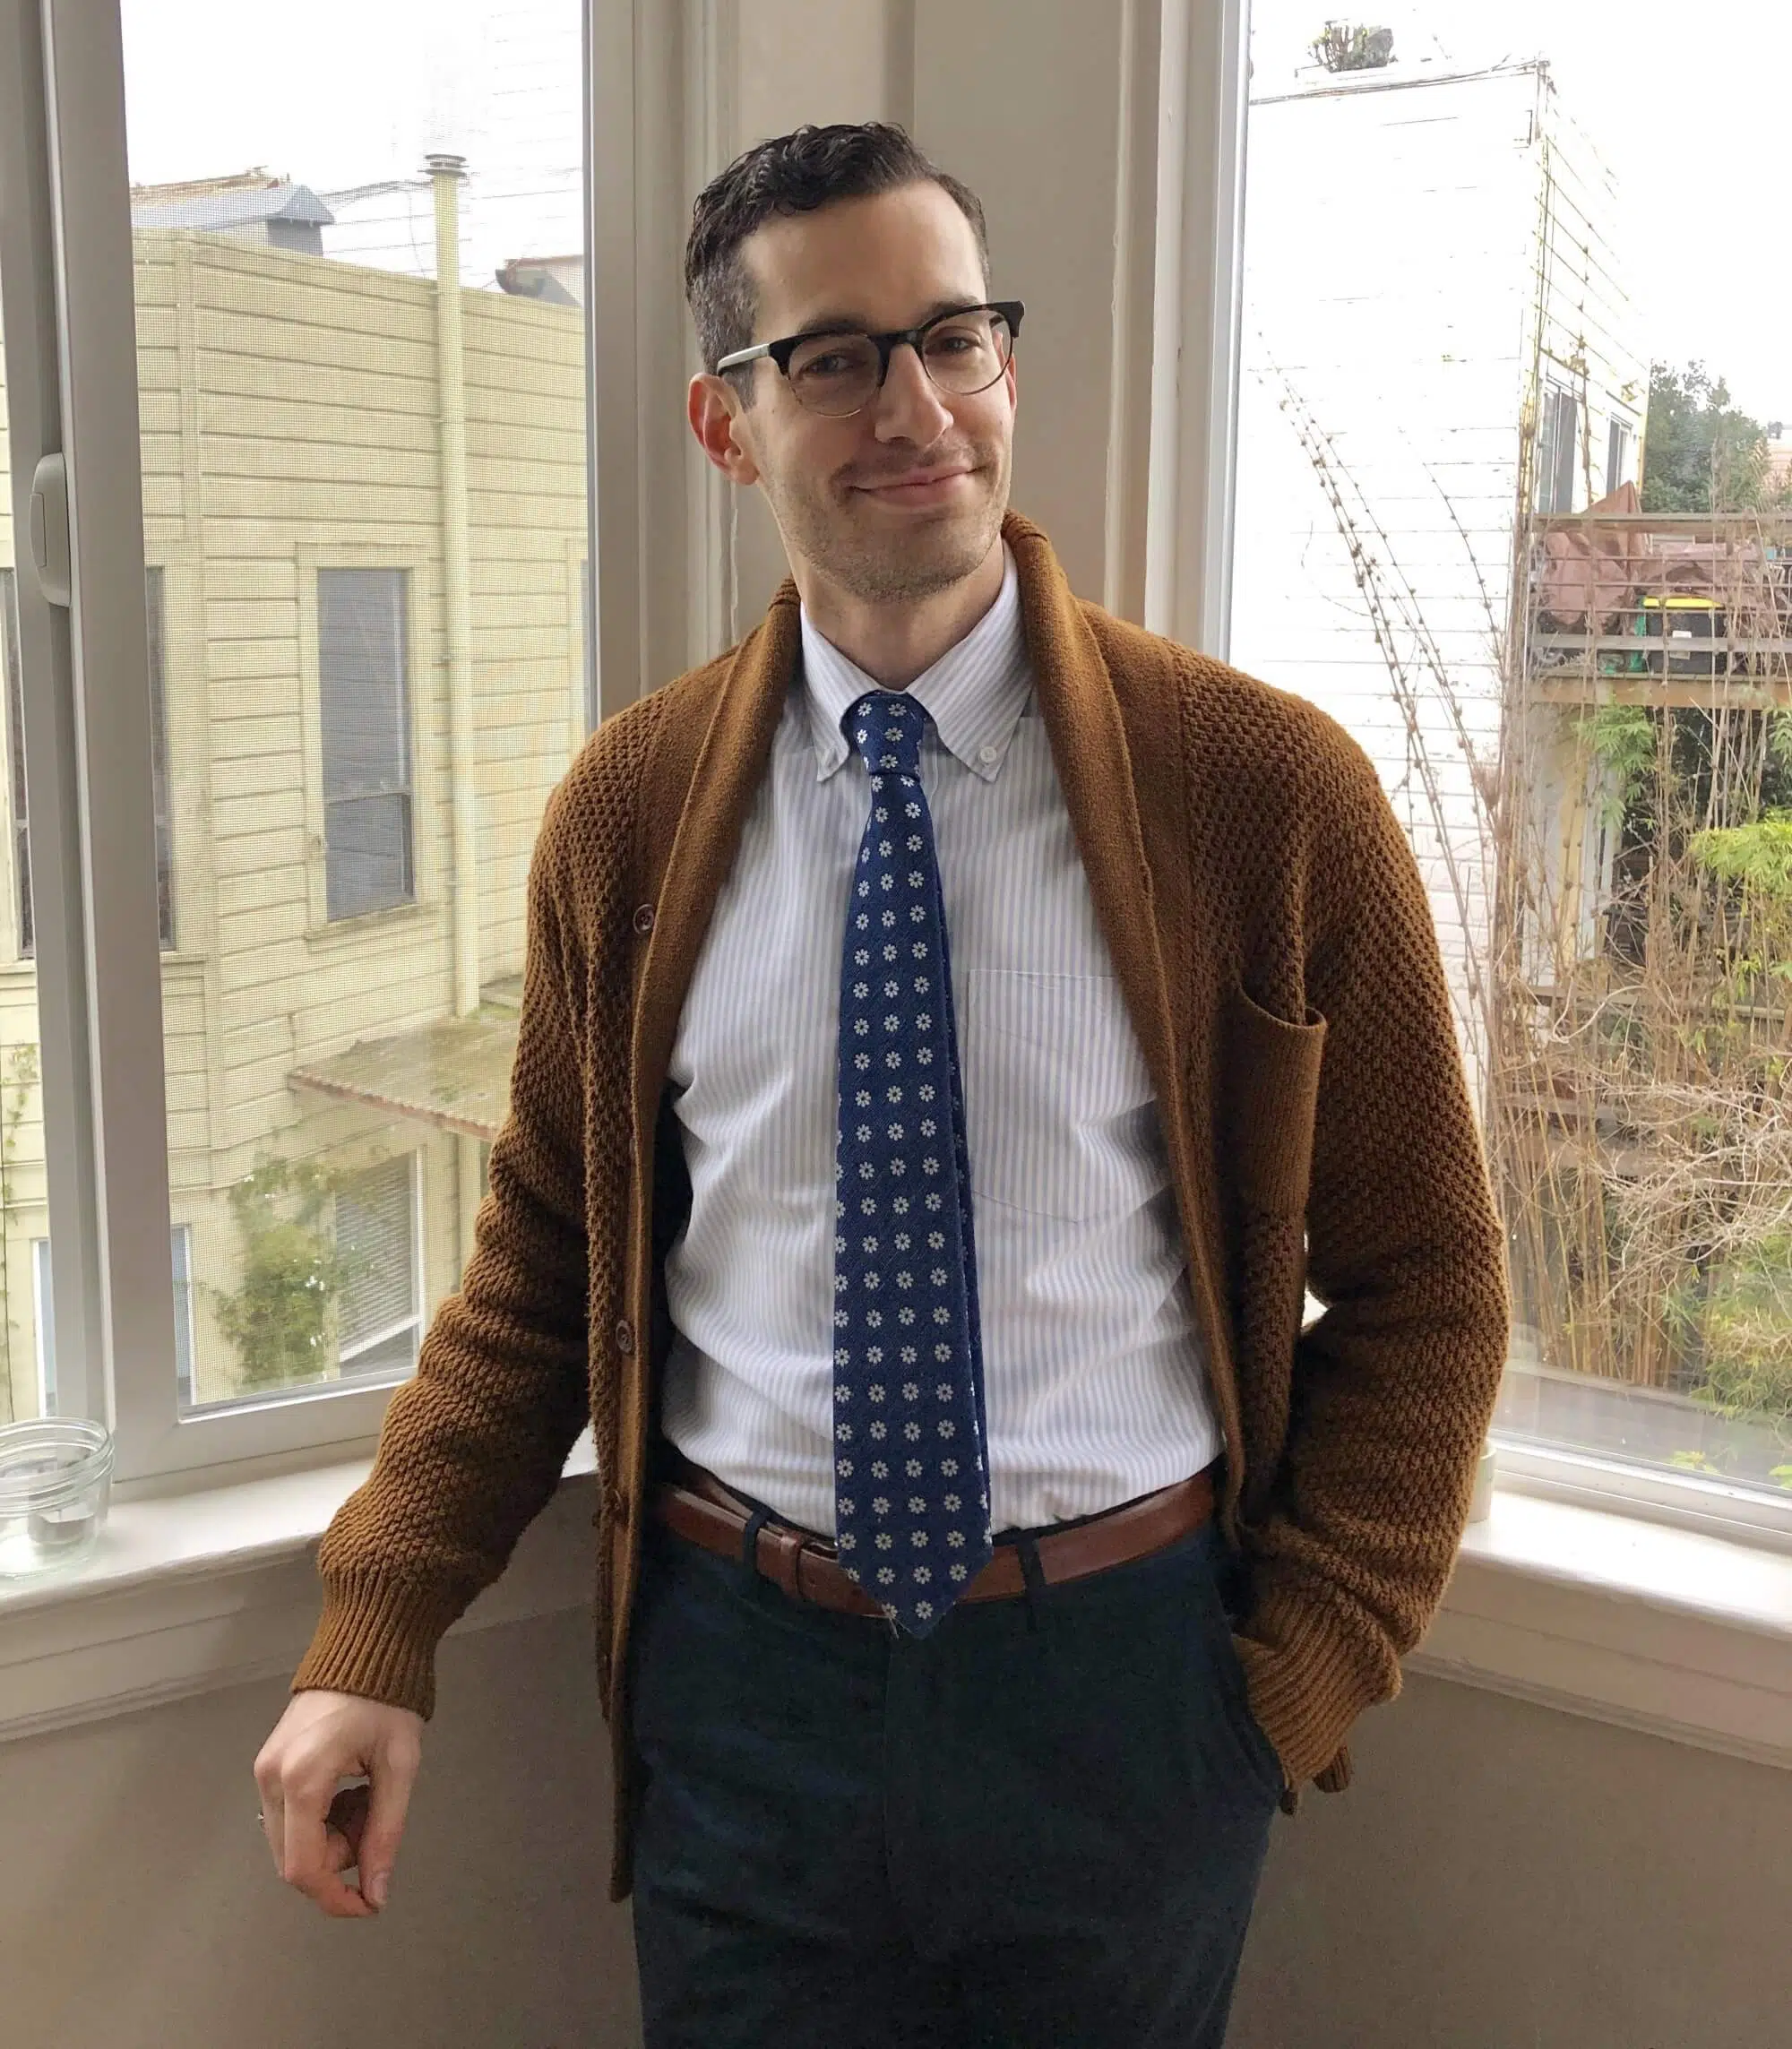 Neck cardigans with a tie